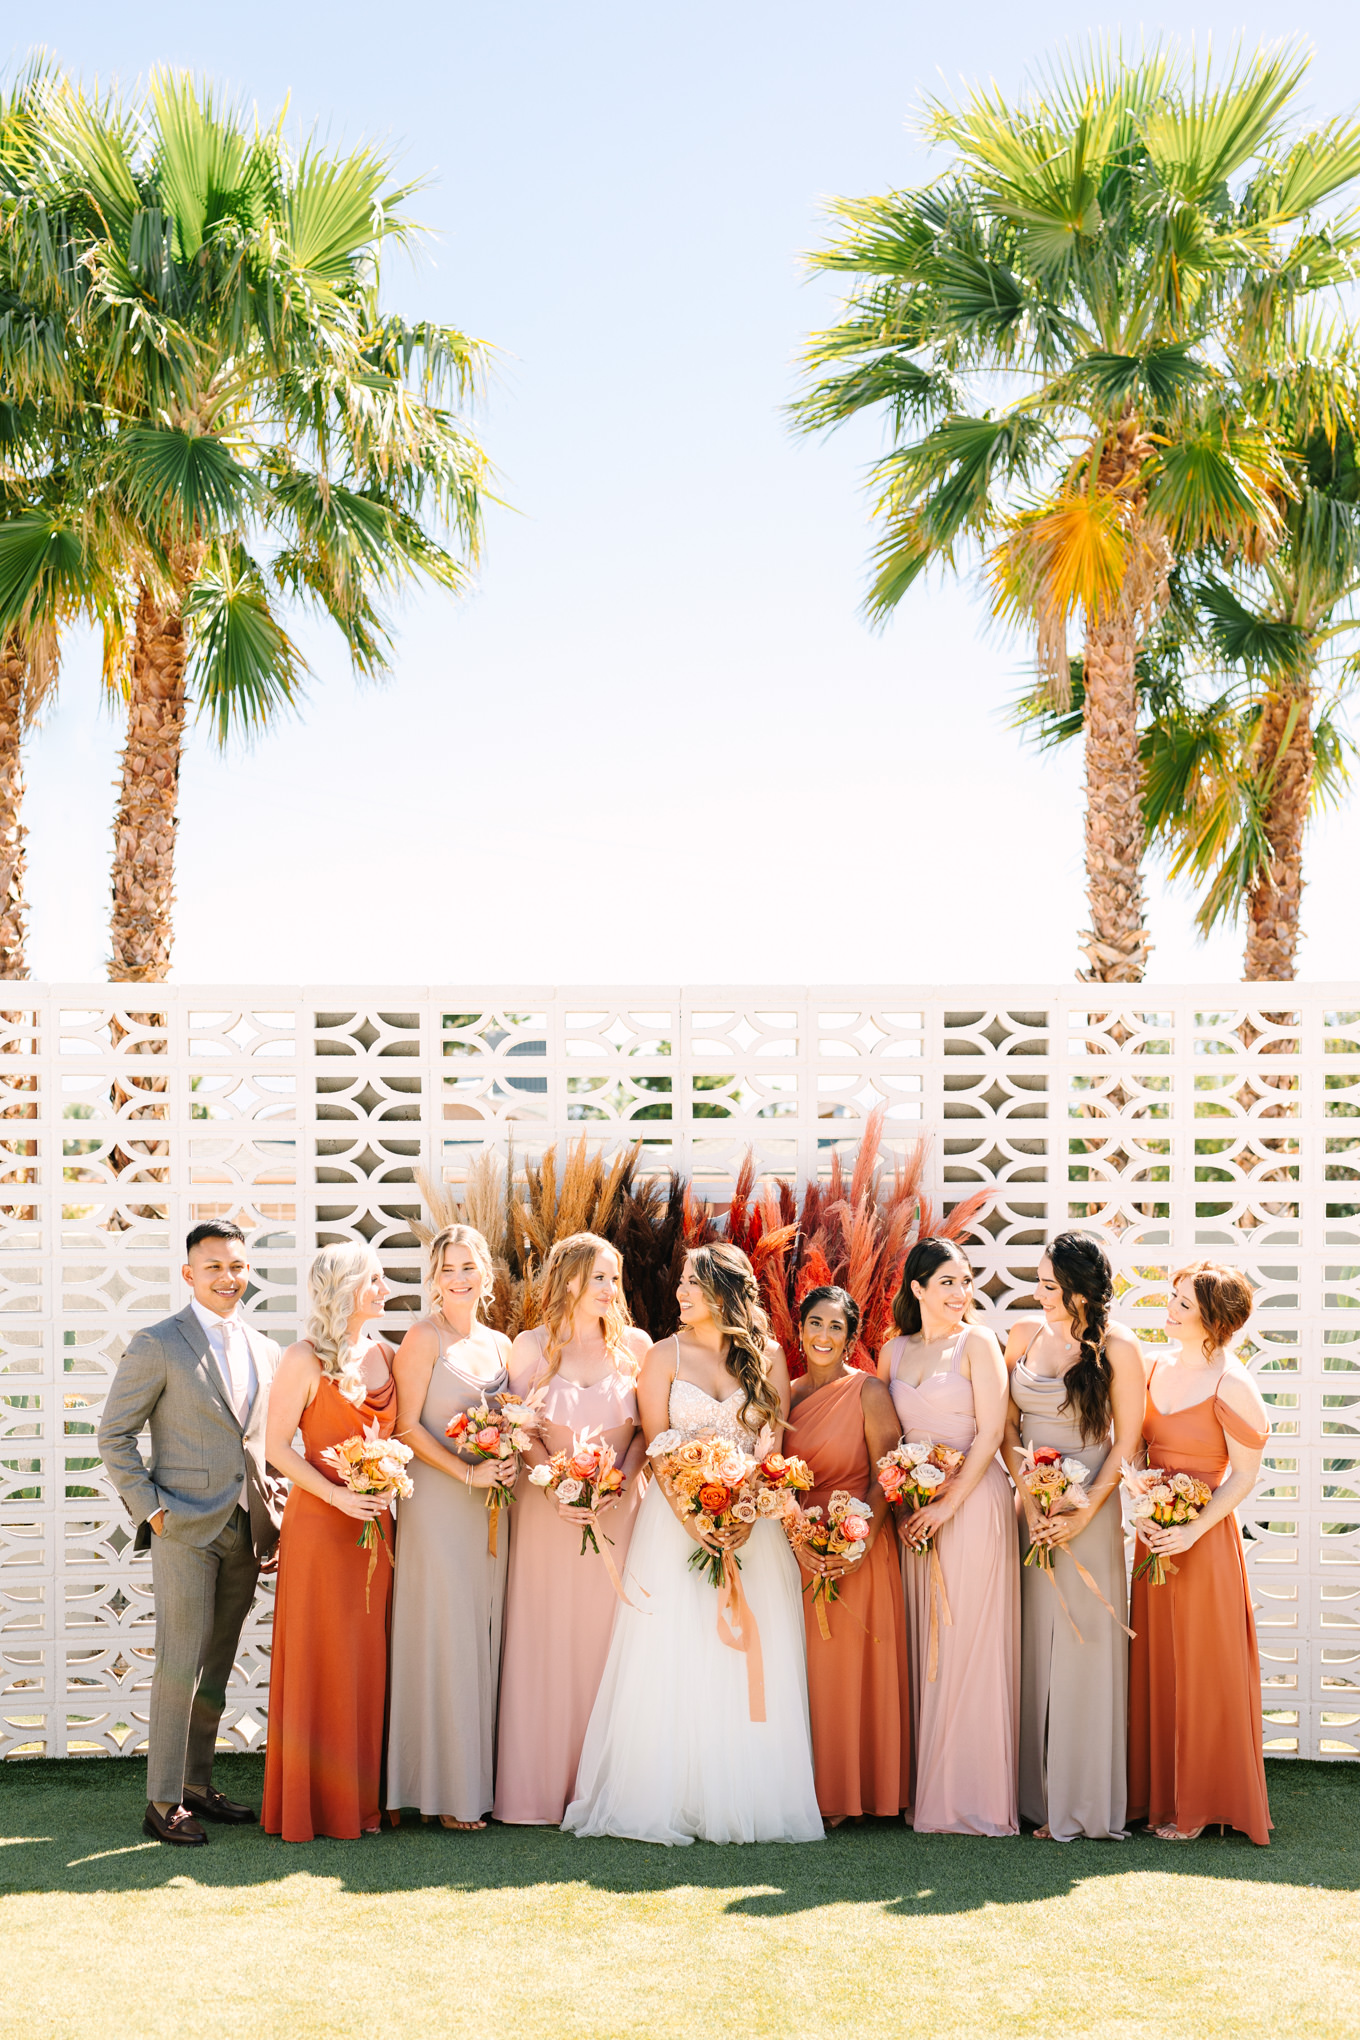 Bridal party in terra cotta, pink, and gray | Pink and orange Lautner Compound wedding | Colorful Palm Springs wedding photography | #palmspringsphotographer #palmspringswedding #lautnercompound #southerncaliforniawedding  Source: Mary Costa Photography | Los Angeles